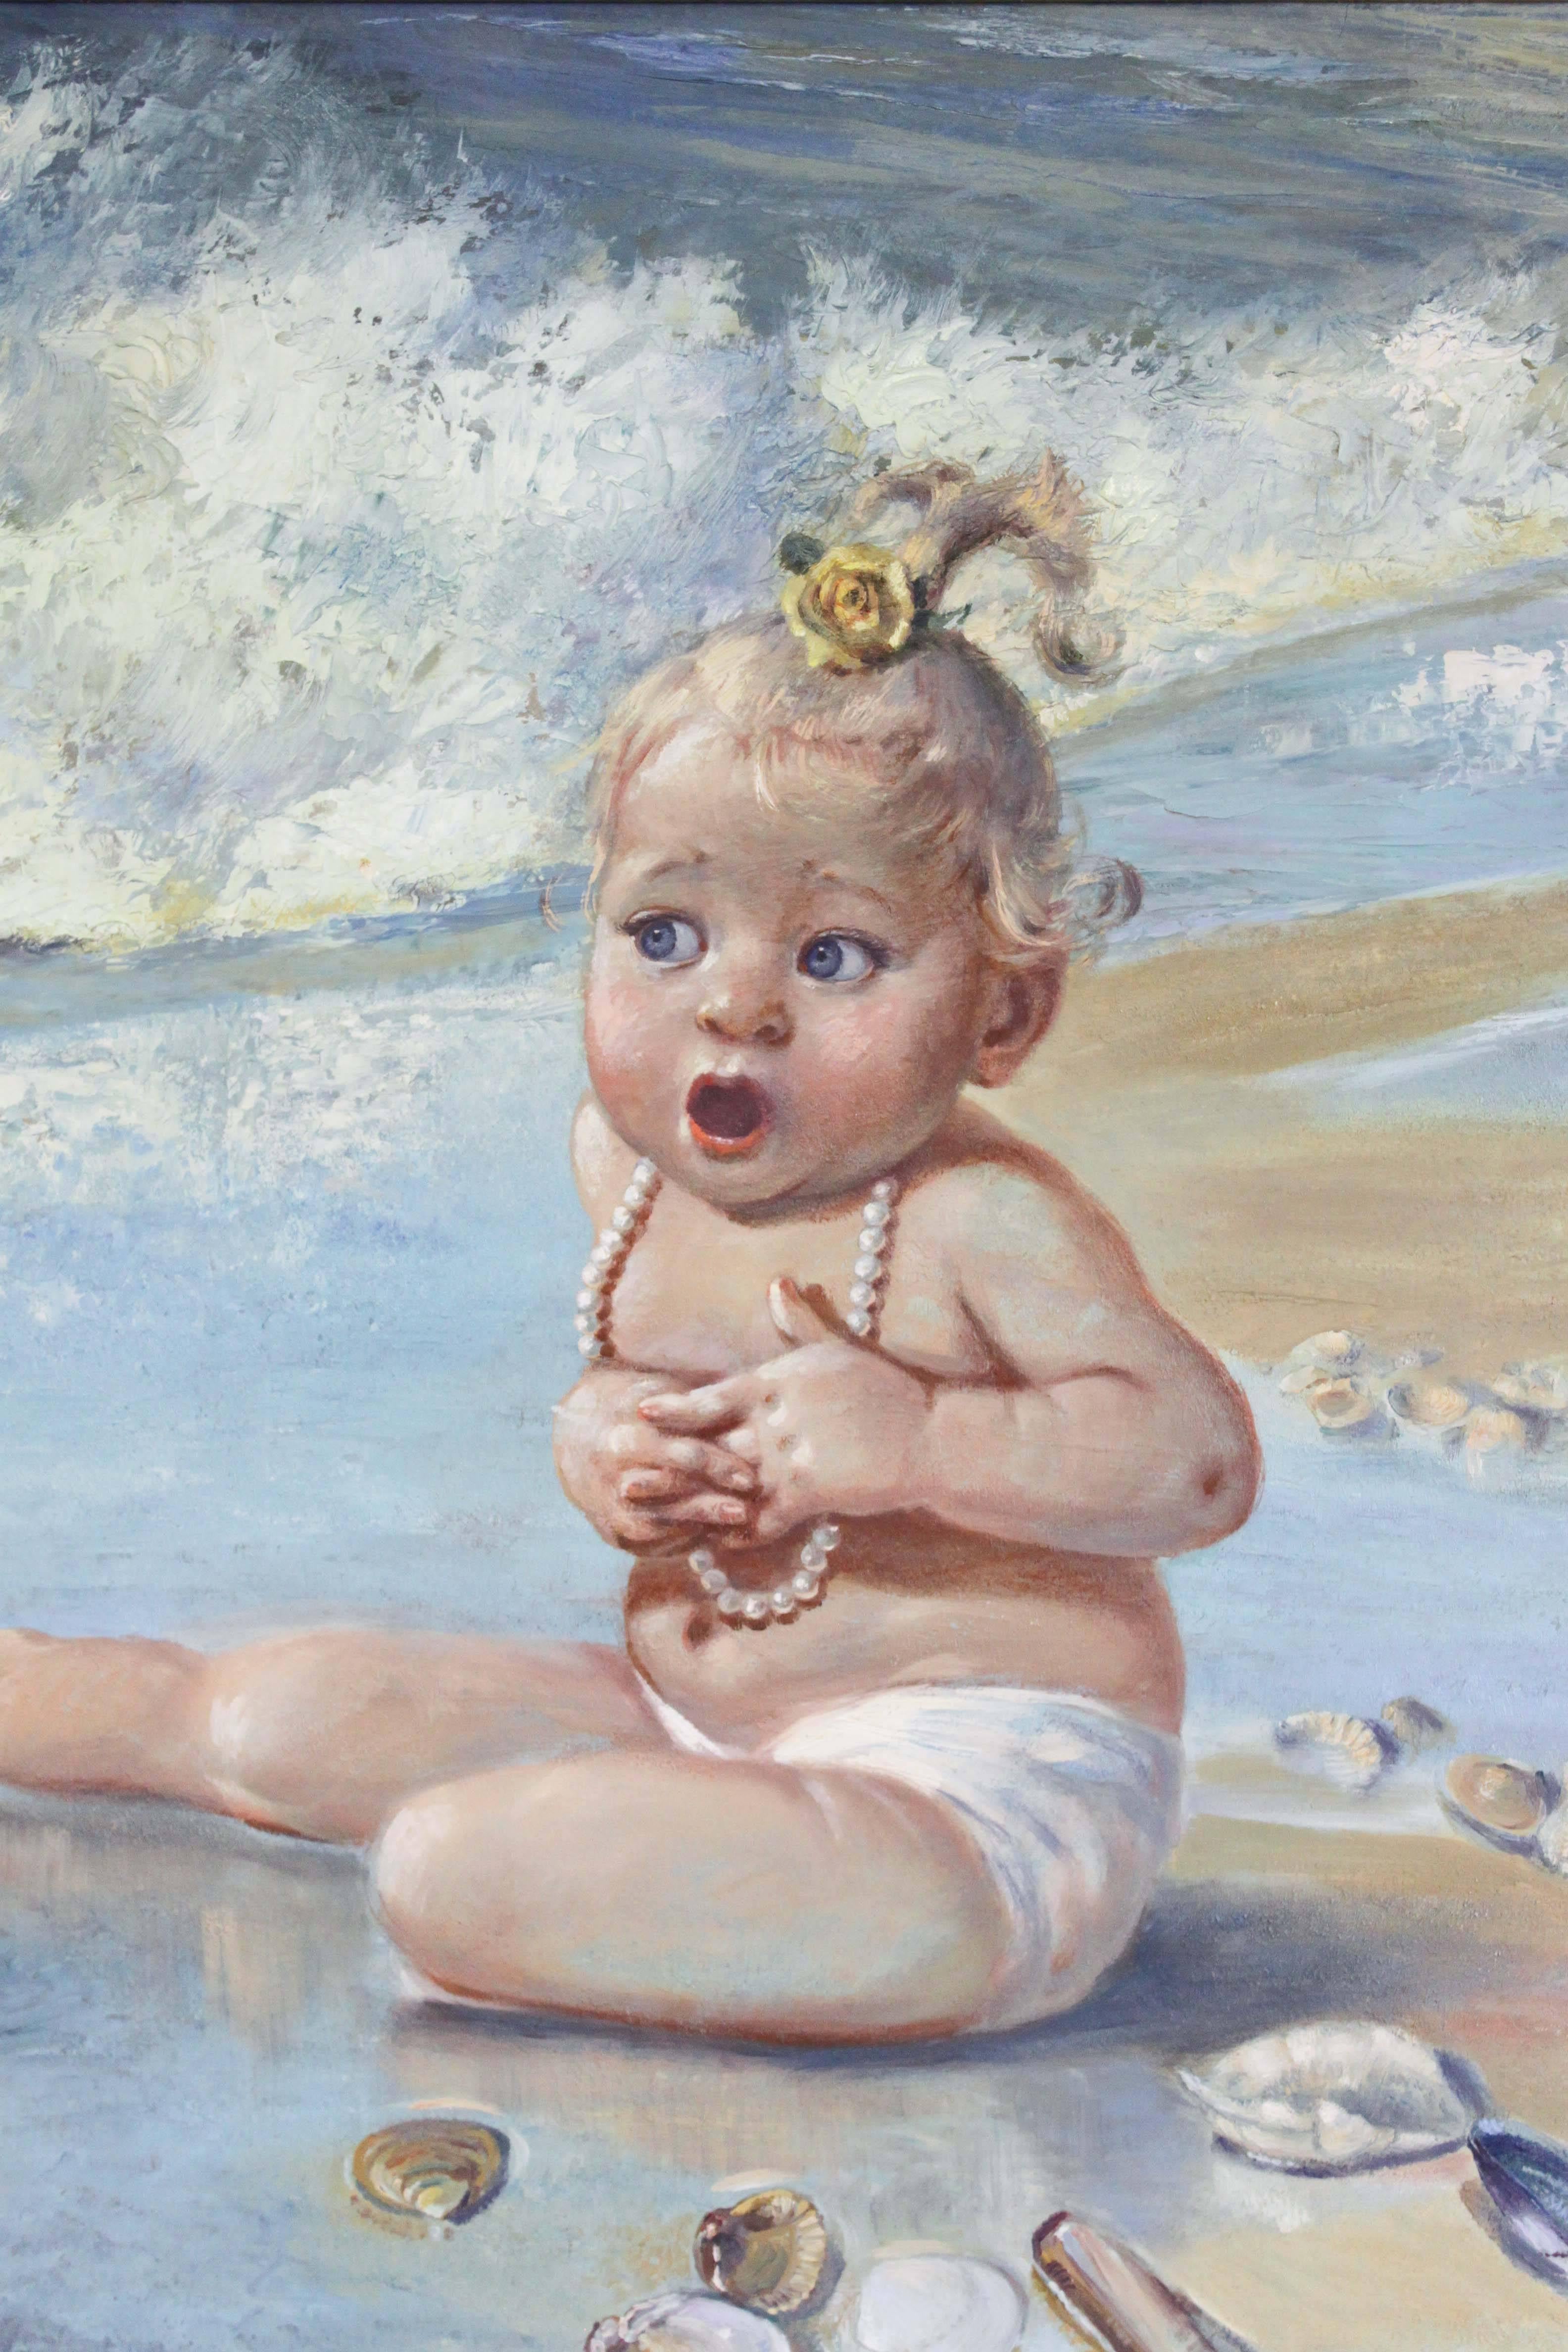 This is a great oil on board painting of a child on the beach by Indonesian/Dutch artist Josephine Augusta Elisabeth Pluim Mentz. Pluim-Mentz exhibited in the Hague and Montreux, France. Signed and inscribed verso., dated 1969.